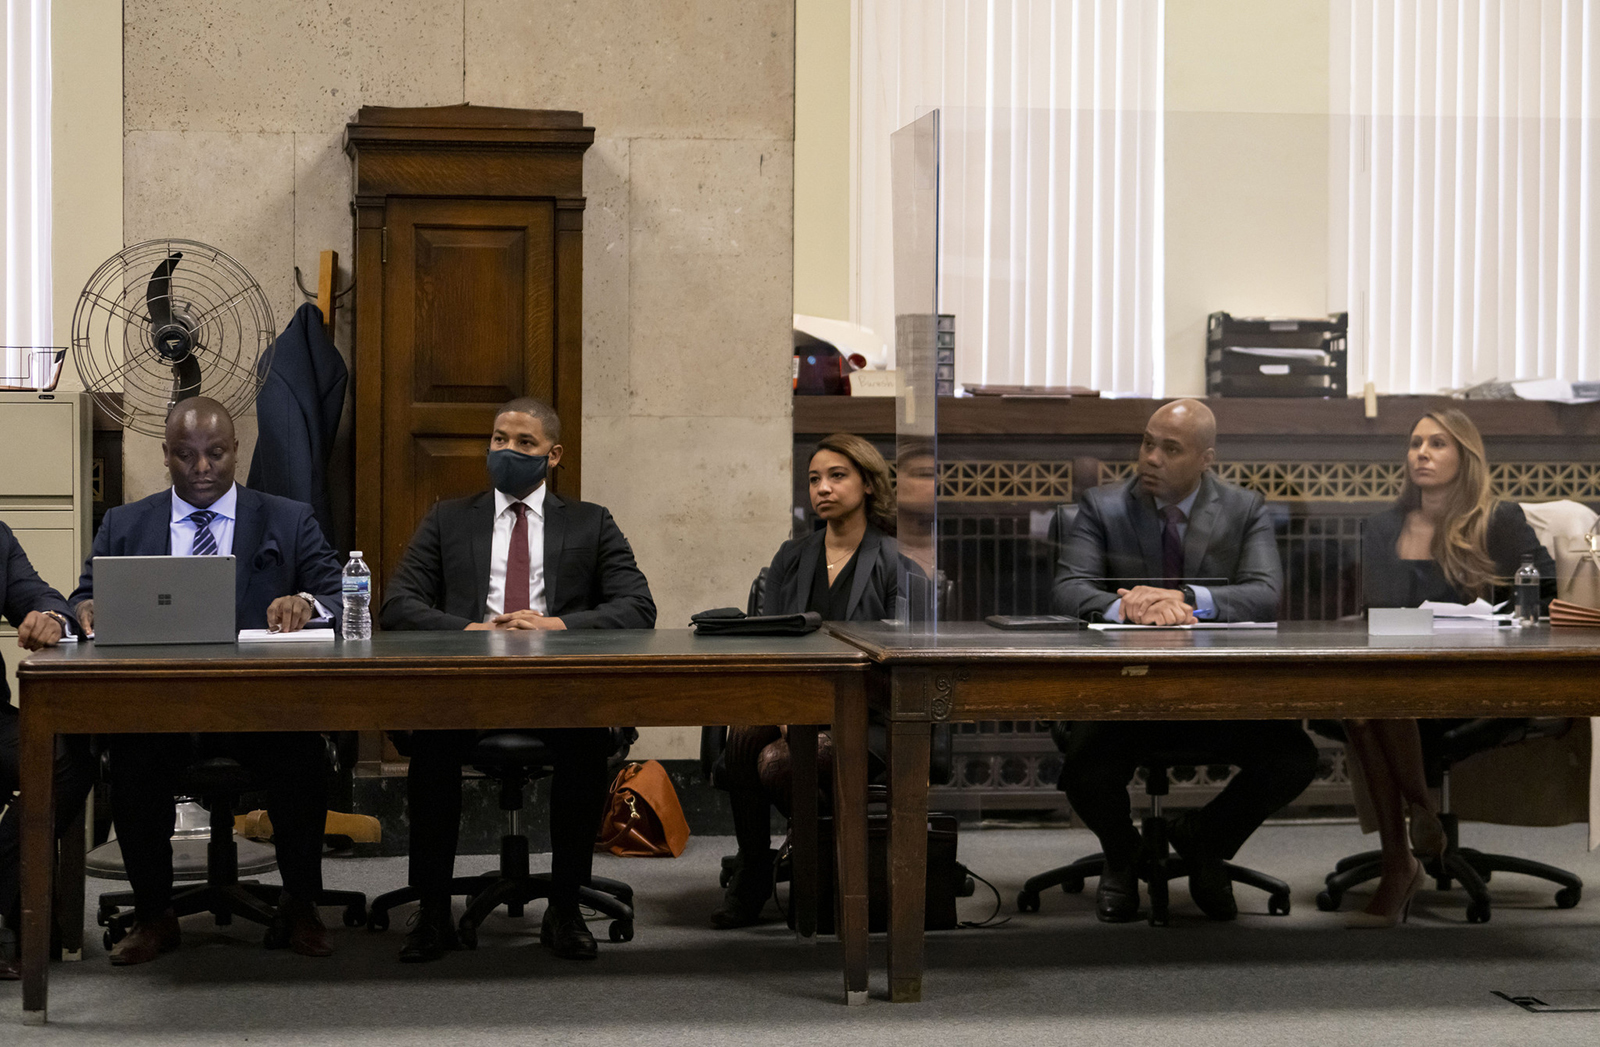 Jussie Smollett appears with his attorneys at his sentencing hearing